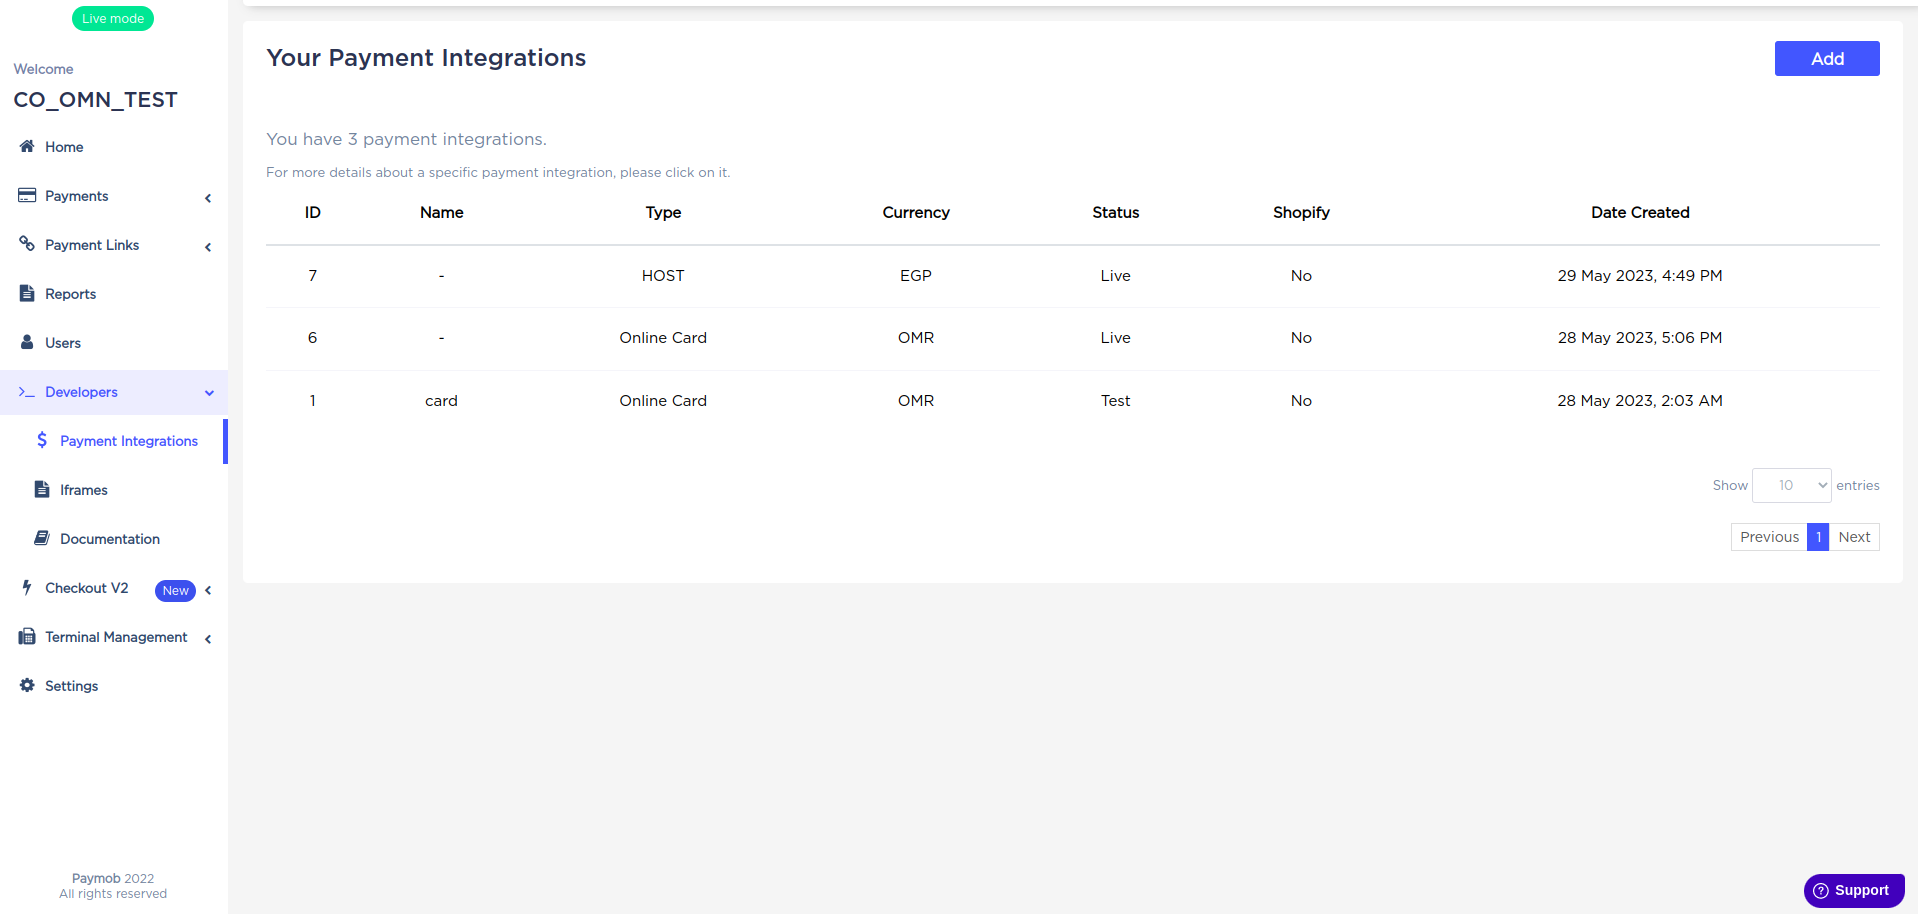 Accept Dashboard - Payment Integrations tab.